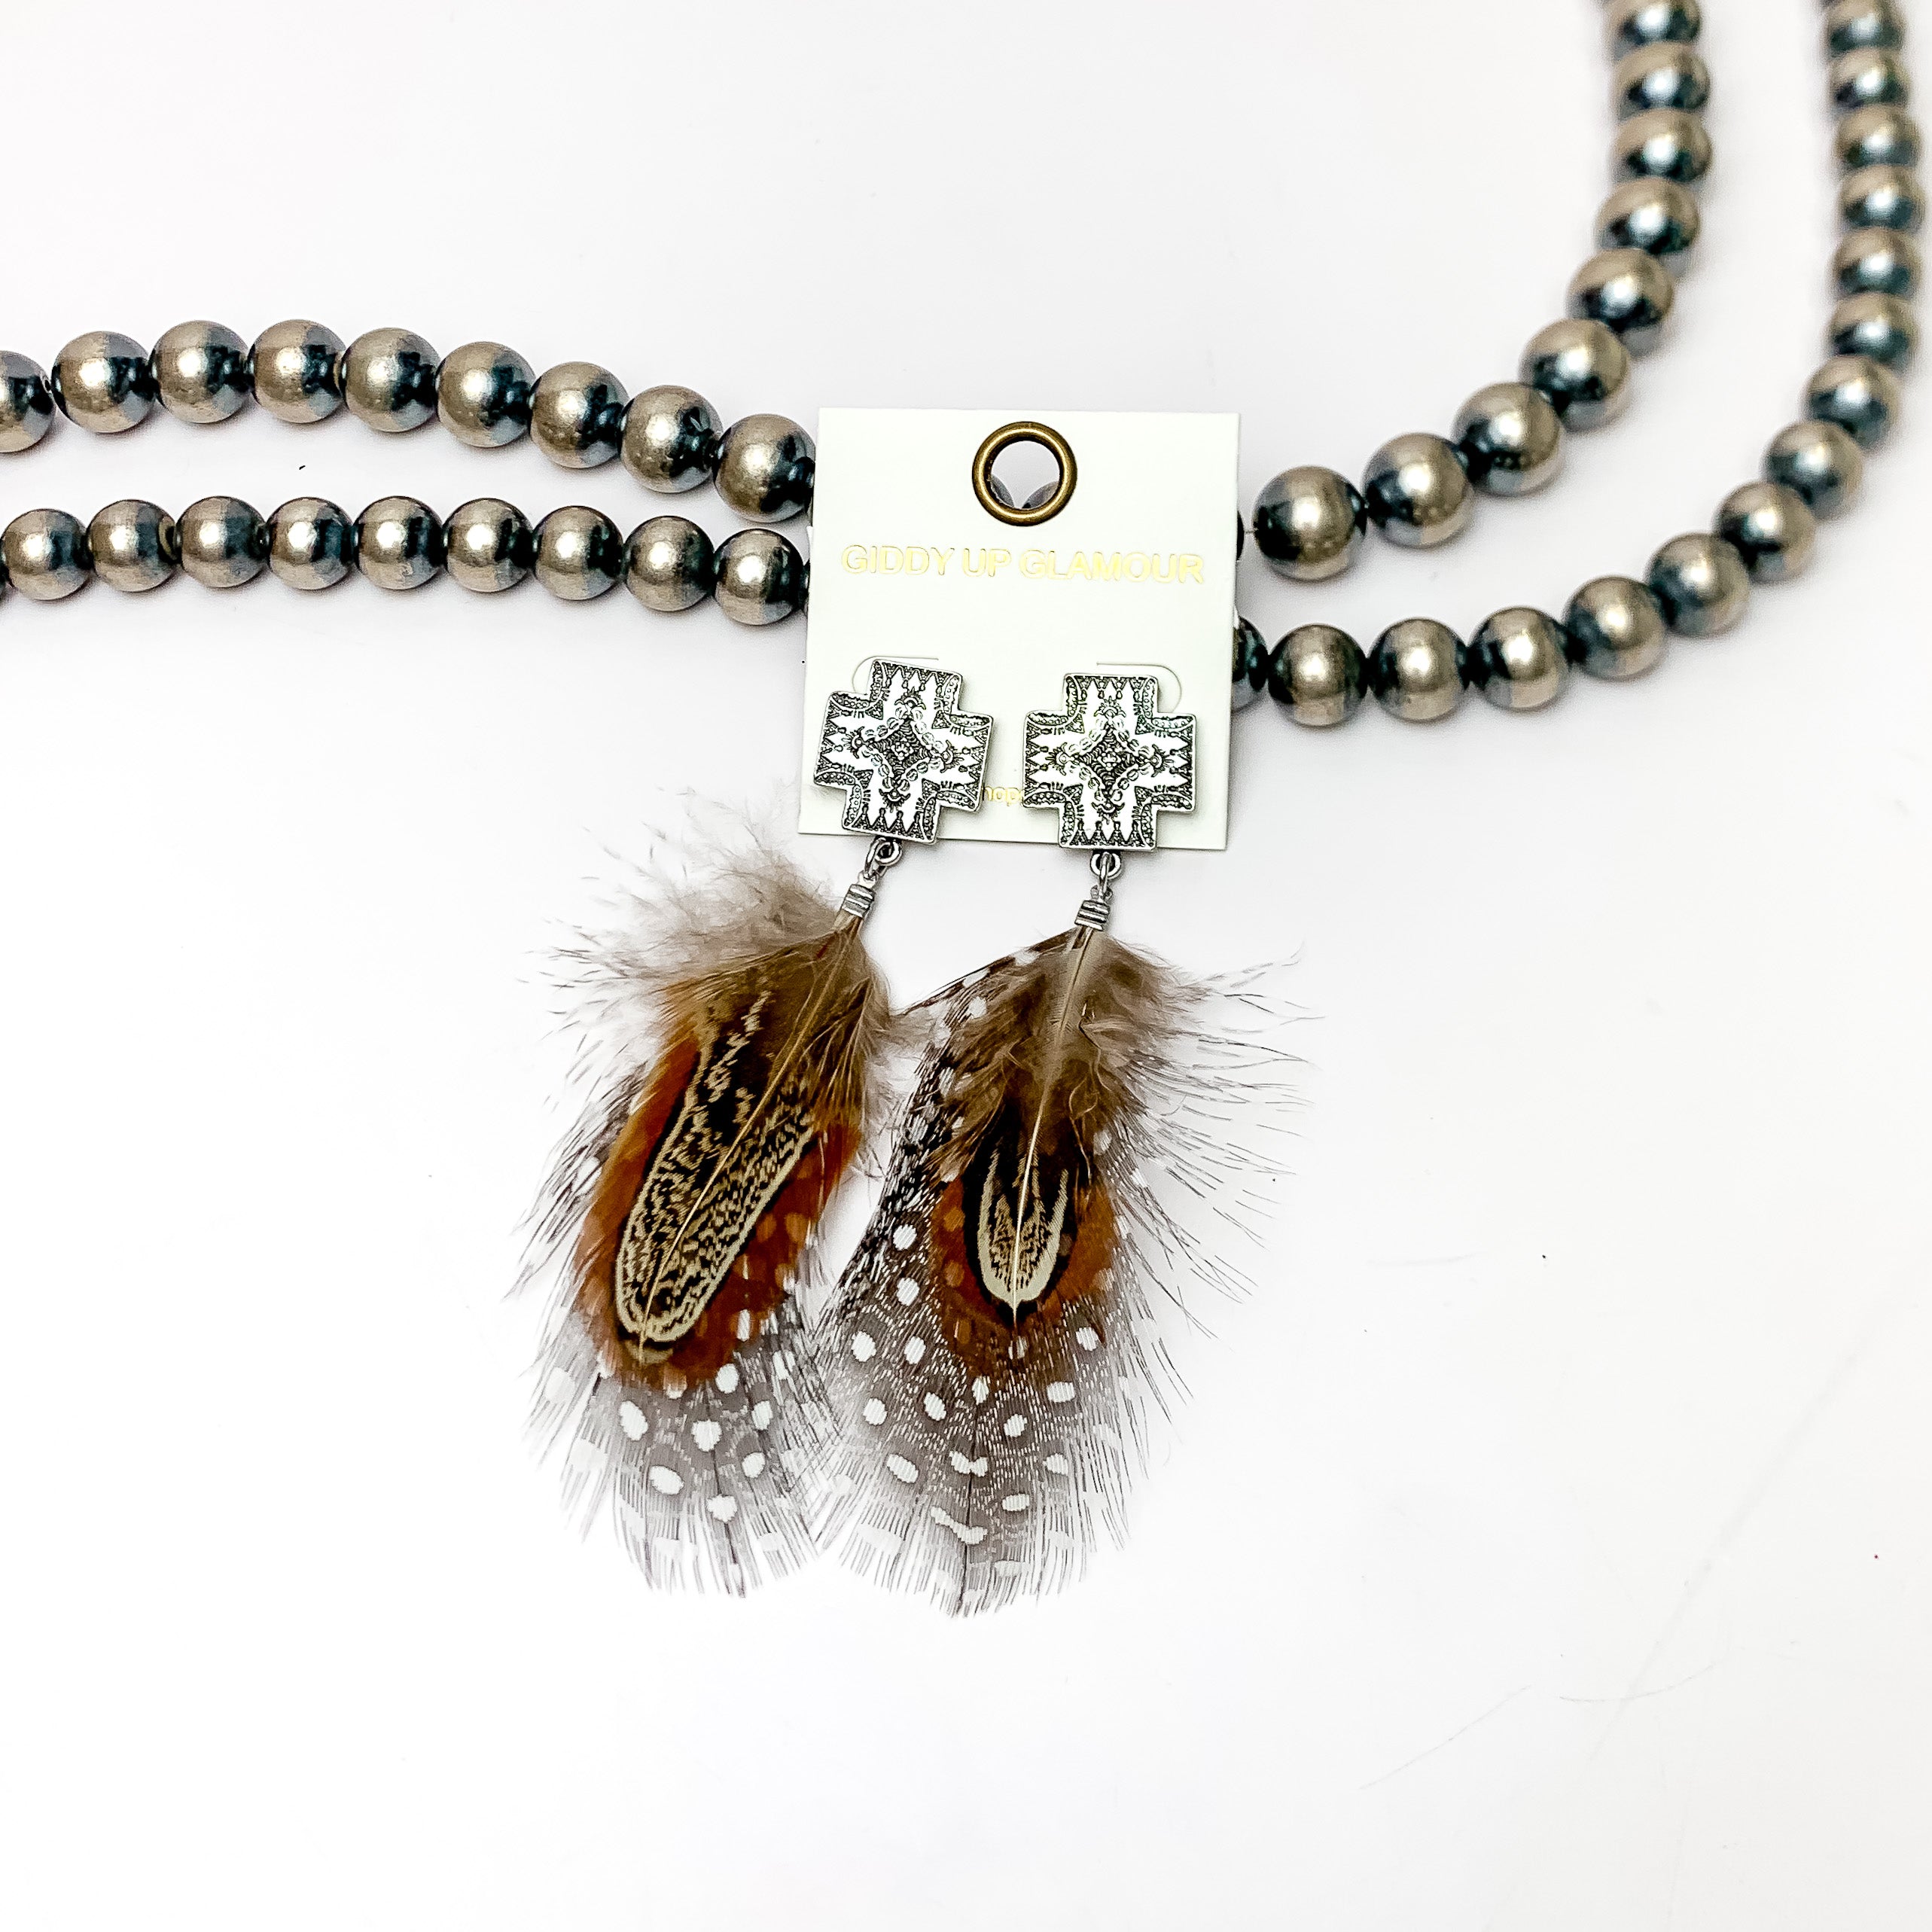 Silver Tone Cross Post Feather Earrings in Brown and Black. These Earrings are pictured laying against Navajo pearls with a white background.